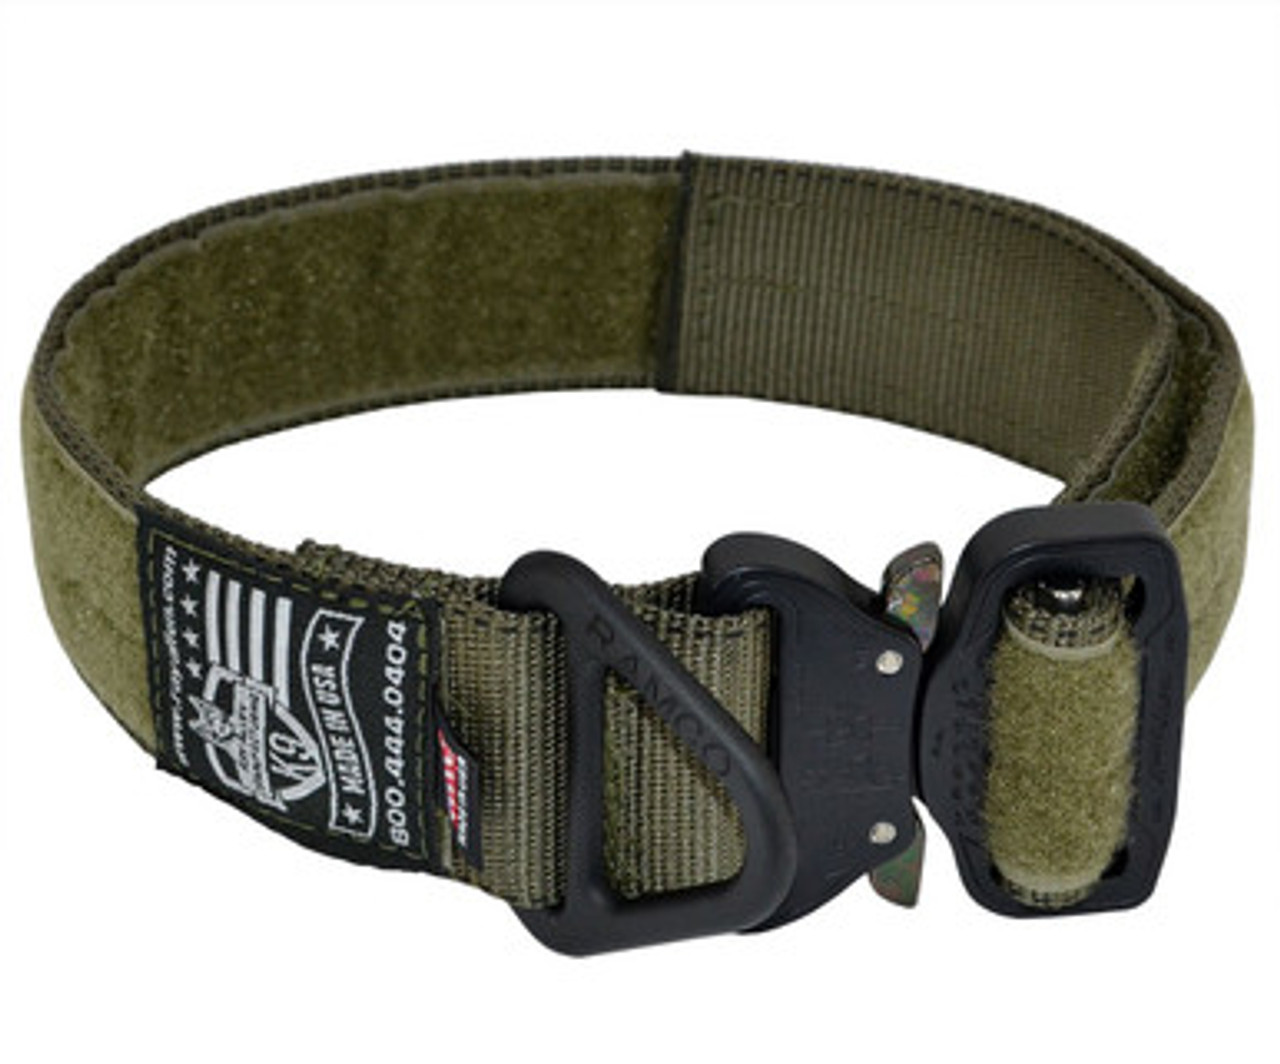 Cobra Dog Collar with Handle Made in USA